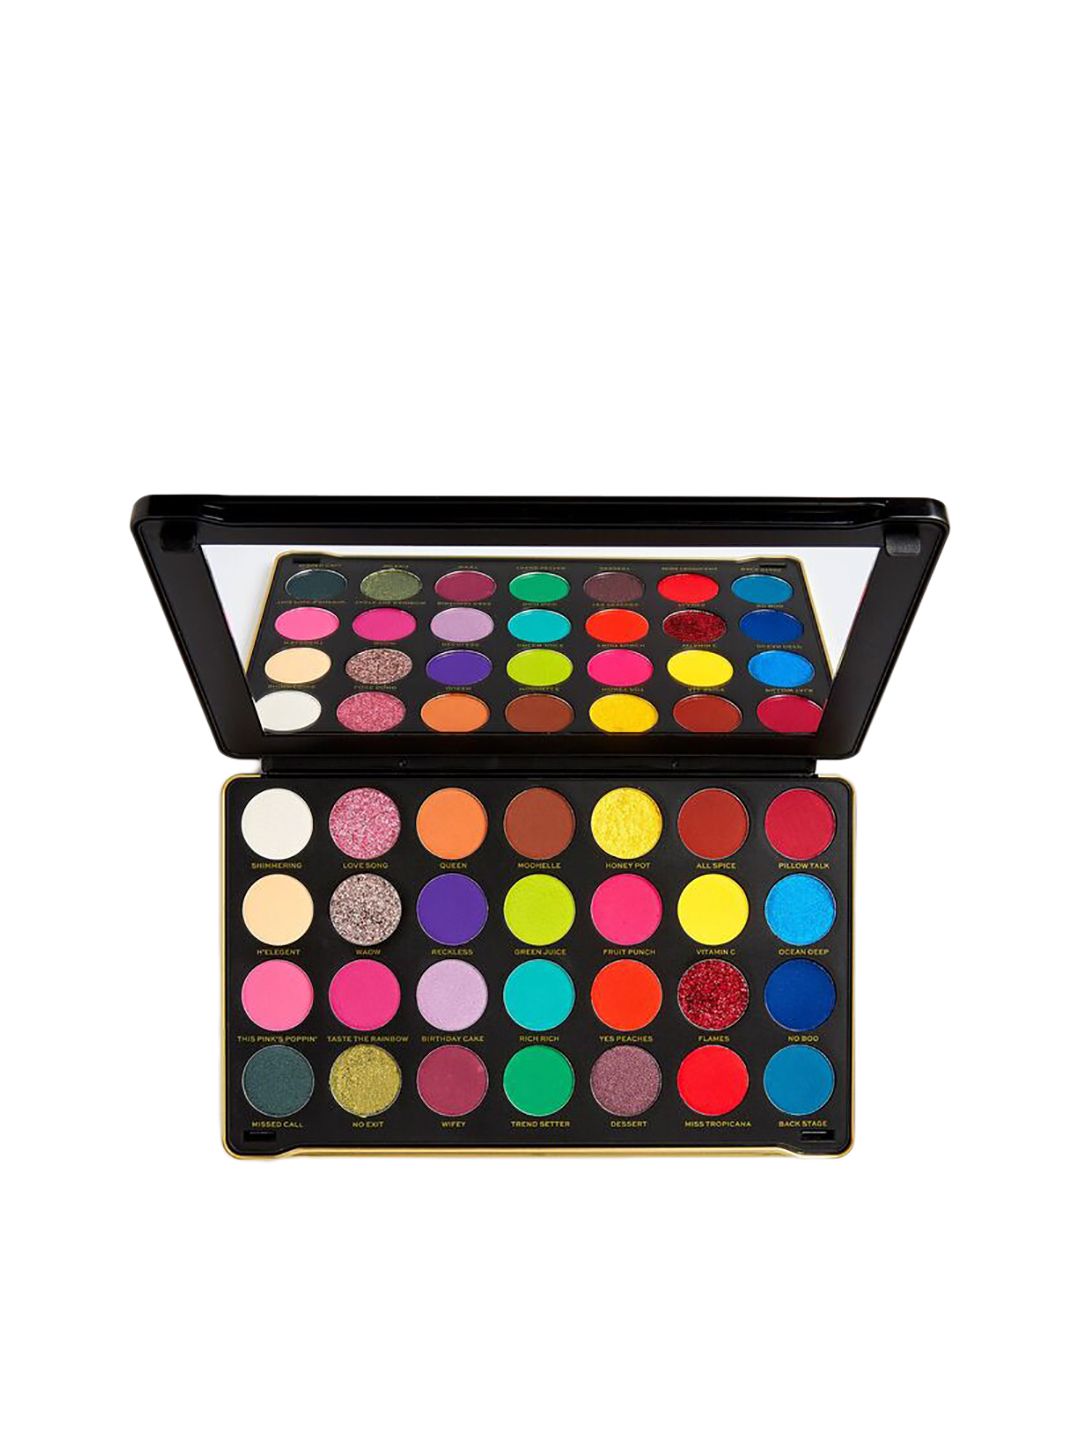 Makeup Revolution London X Patricia Bright Eyeshadow Palette - Rich In Colour Price in India